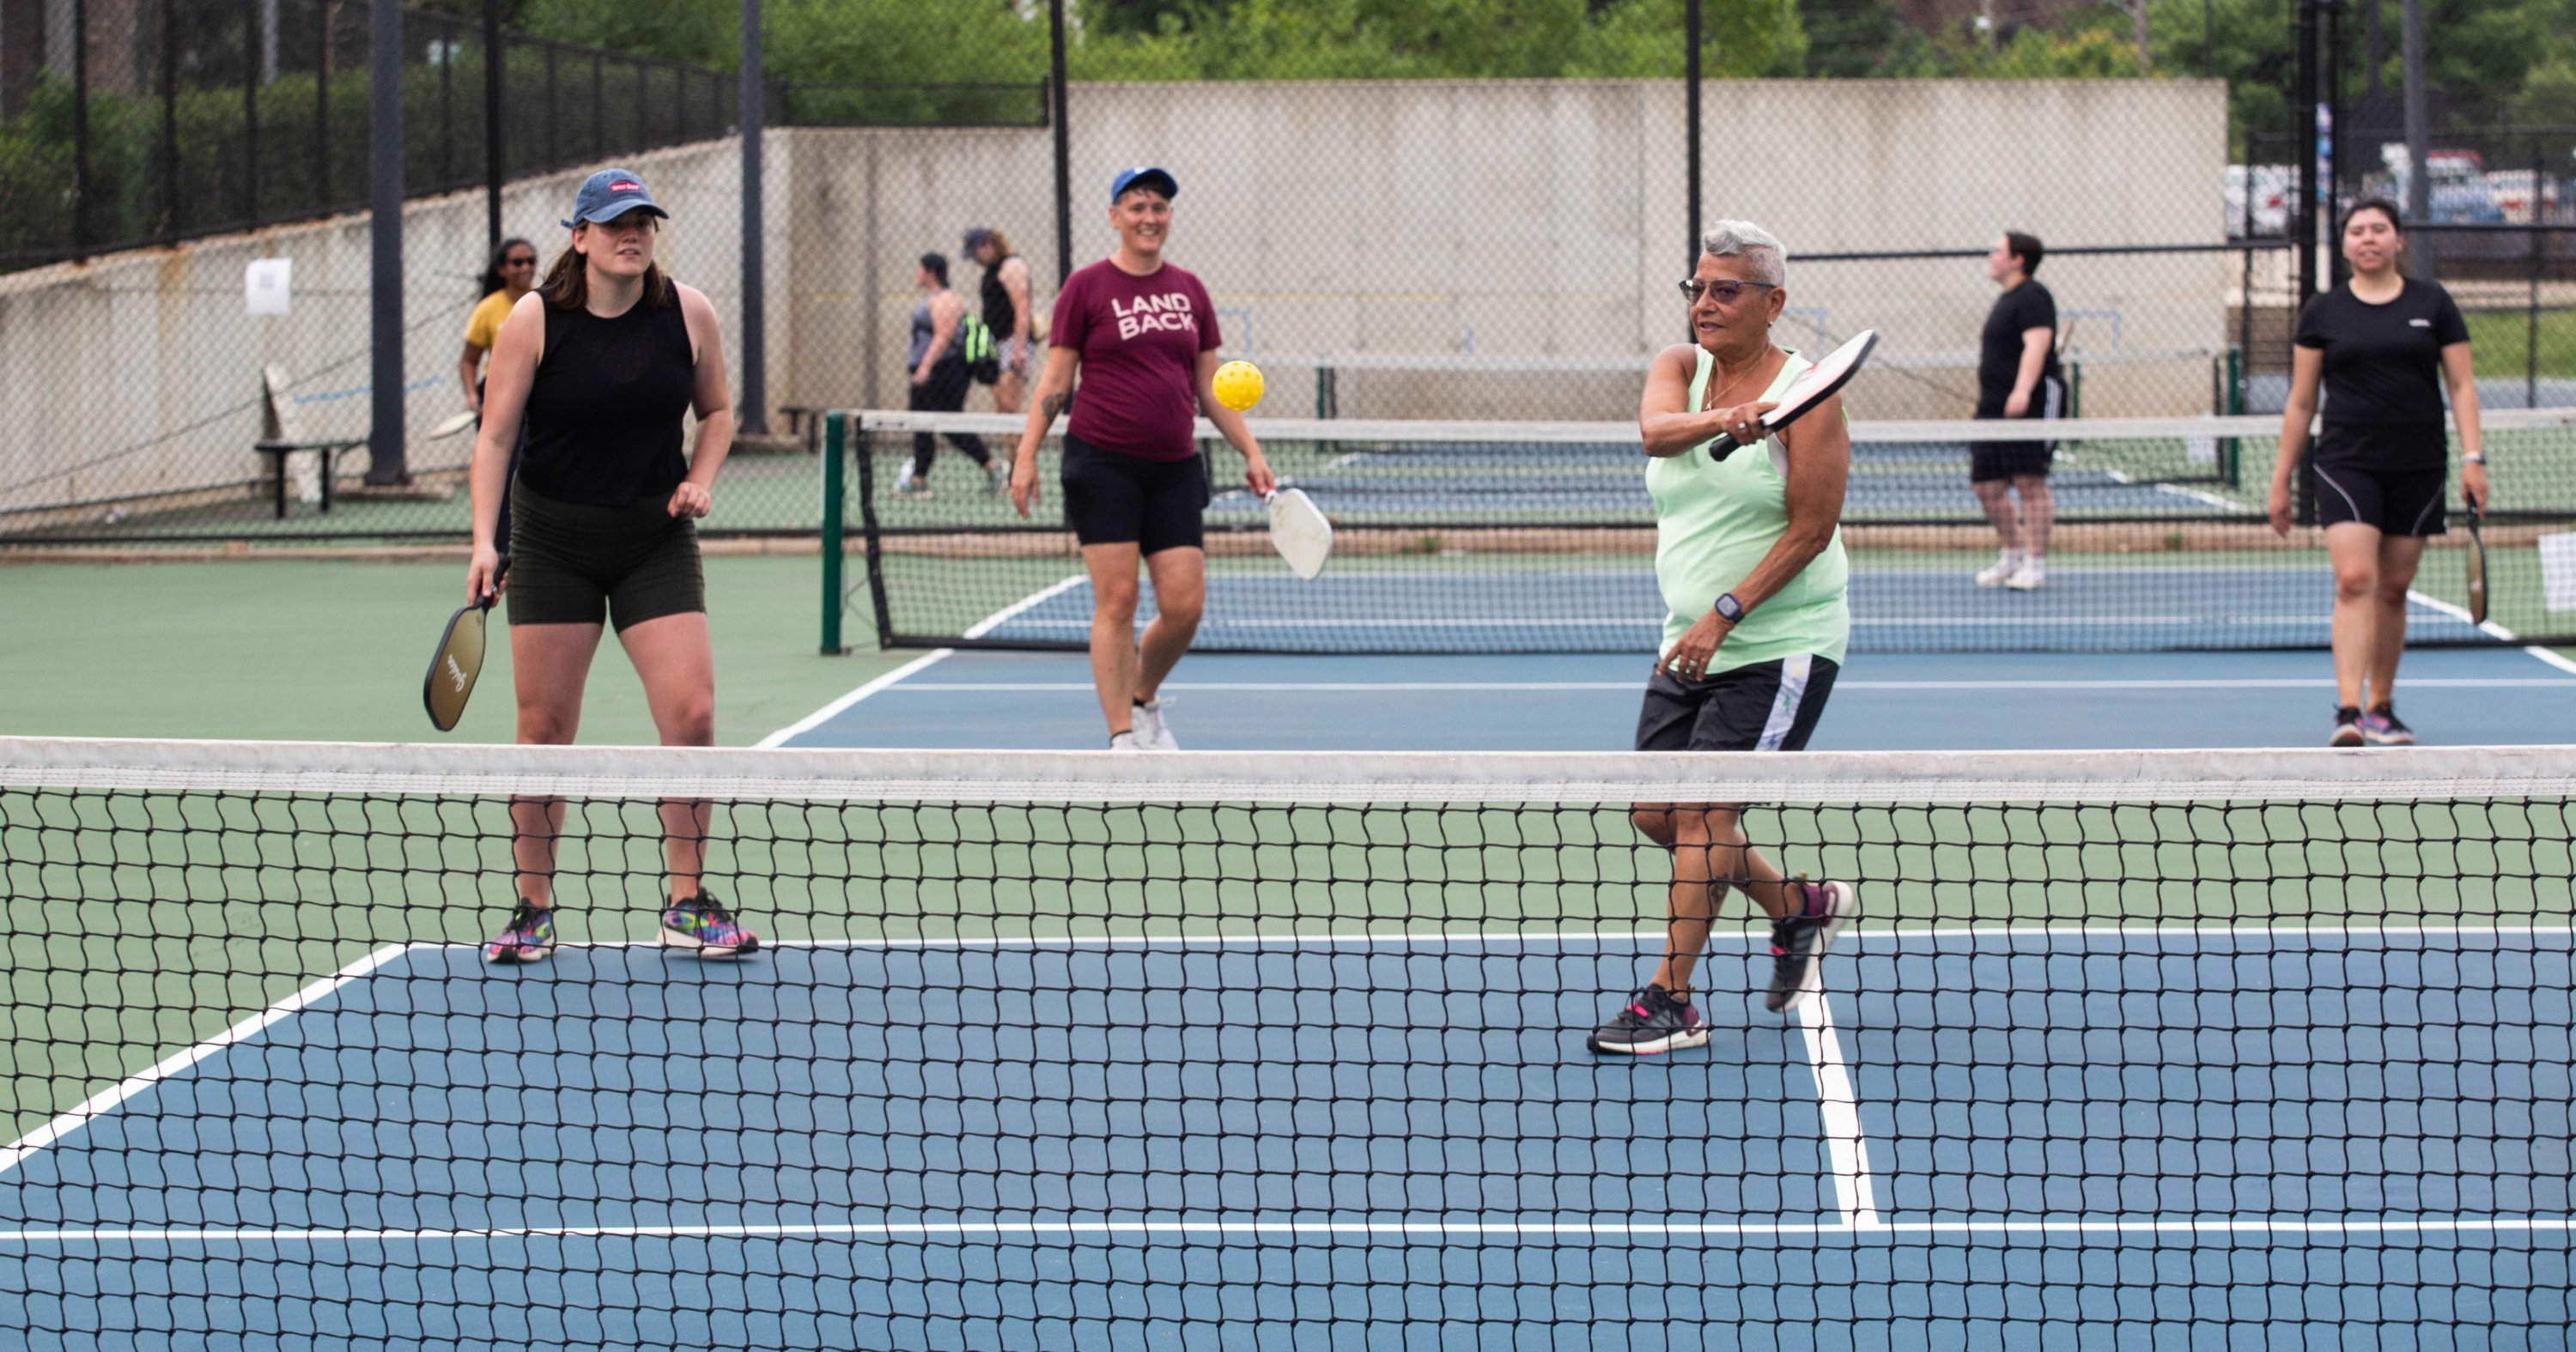 Pickleball is the fastest growing sport on courts near you